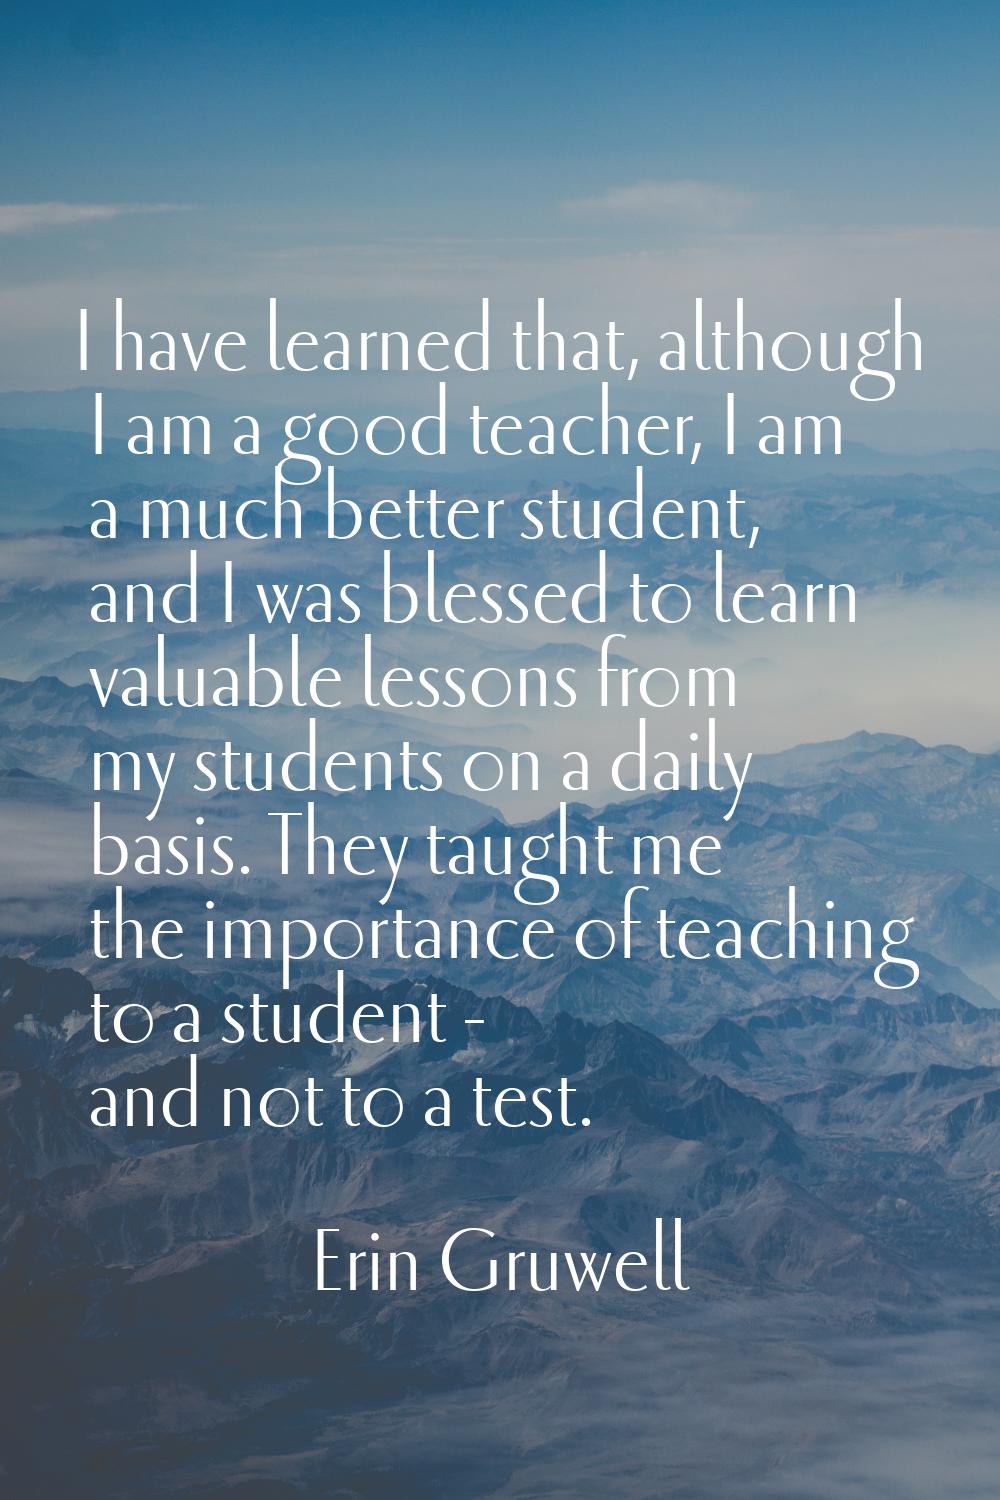 I have learned that, although I am a good teacher, I am a much better student, and I was blessed to